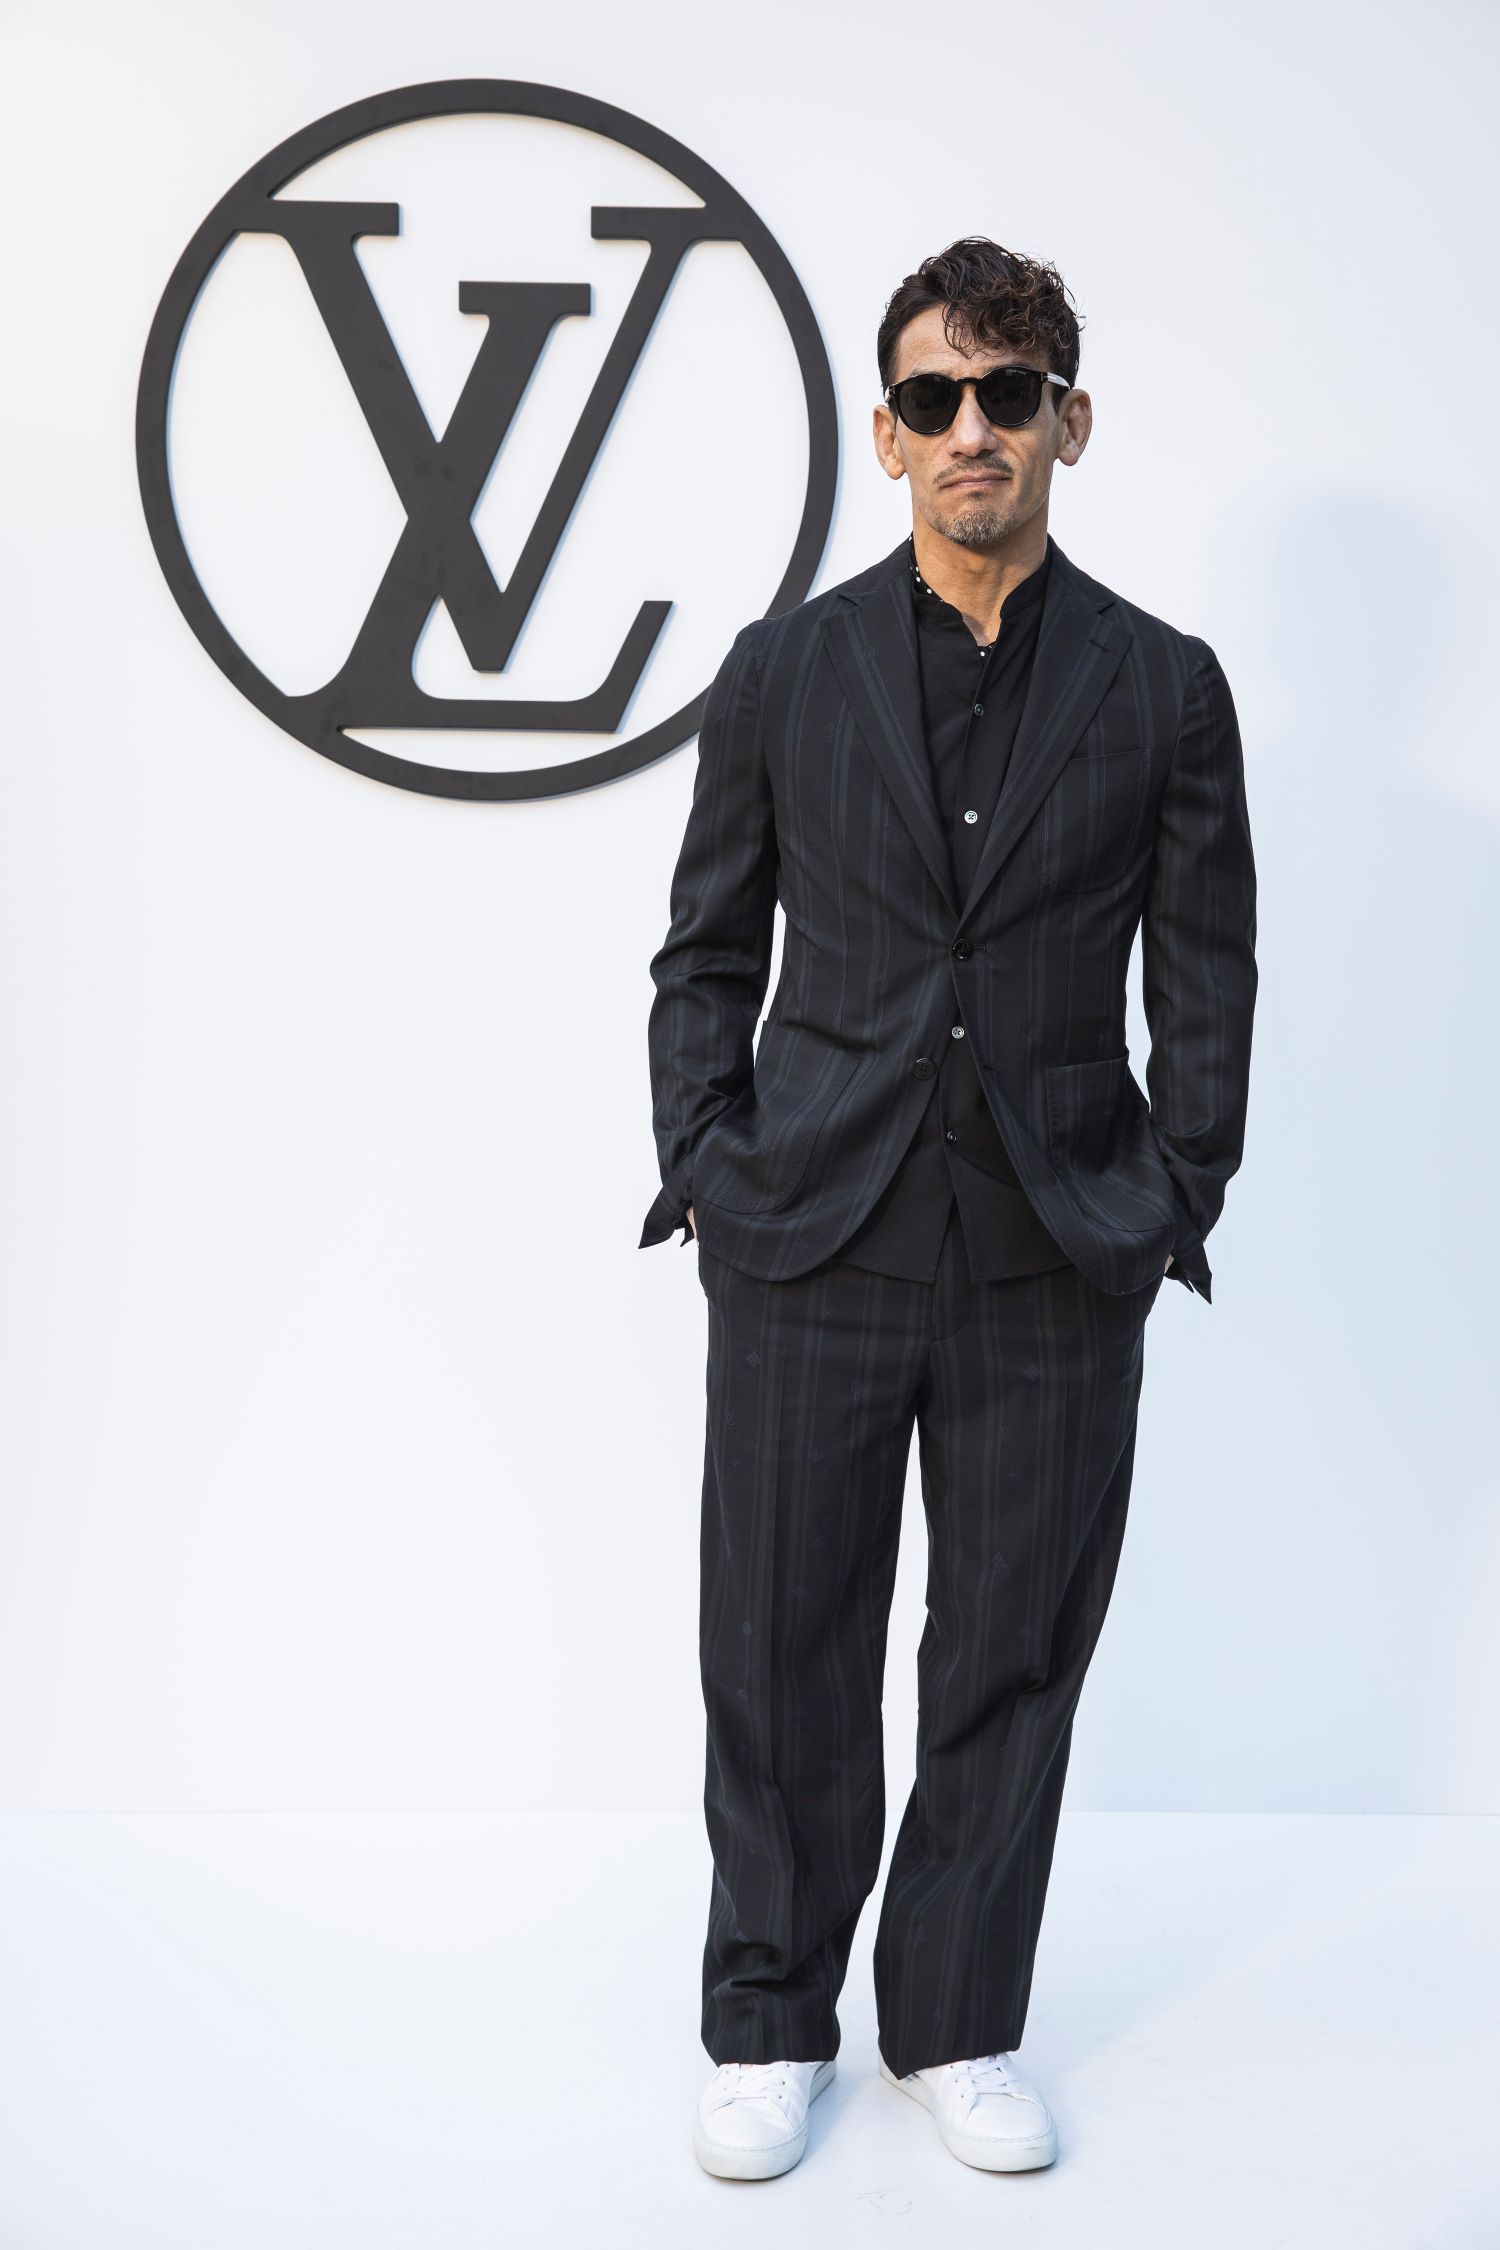 HIDETOSHI NAKATA attending the Cruise 2025 Fashion Show by Louis Vuitton in Barcelona | CRUISE 2025 FASHION SHOW COLLECTION © Louis Vuitton – All rights reserved | Courtesy of Gnazzo Group.